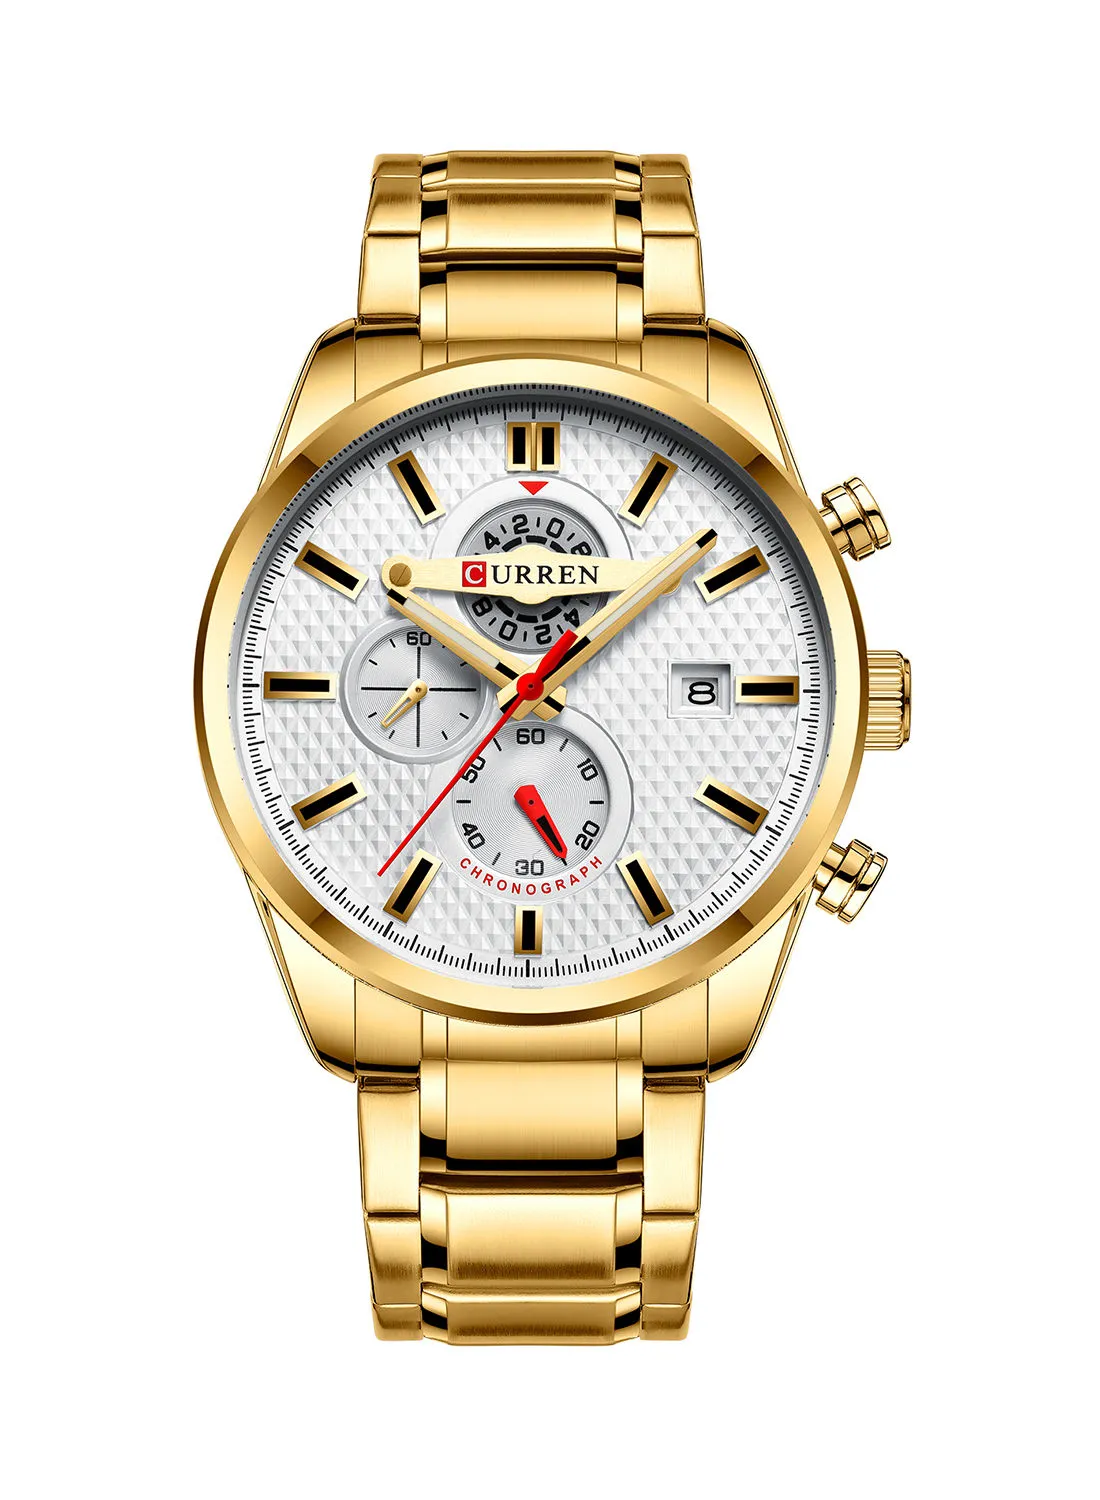 CURREN Men's Chronograph Waterproof Stainless Steel BAnd Casual Quartz Watch 8352 - 47 mm - Gold